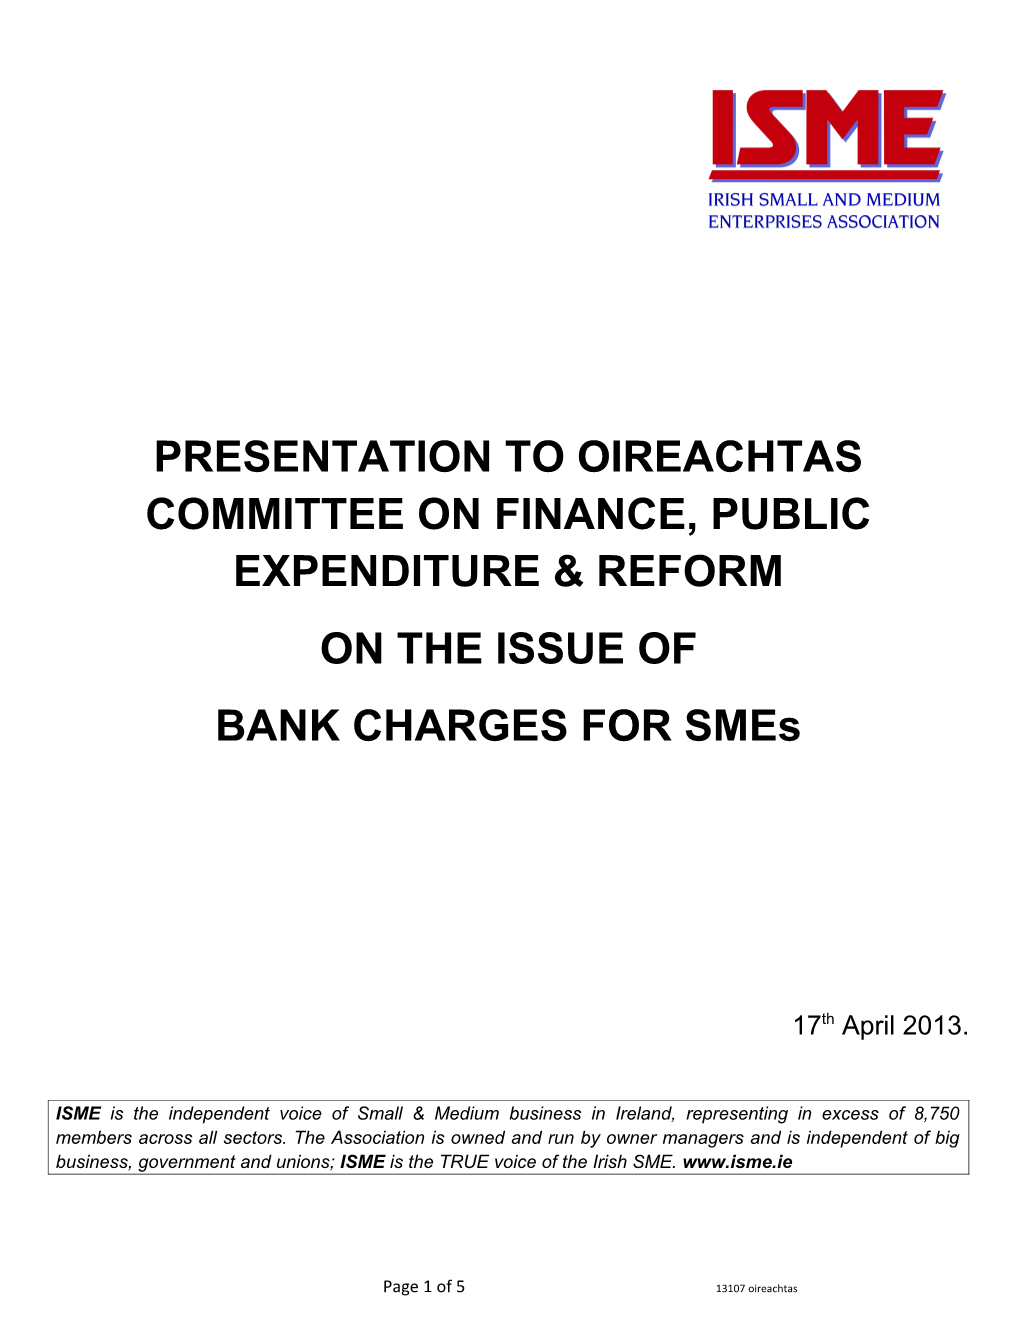 Presentation to Oireachtas Committee on Finance, Public Expenditure & Reform